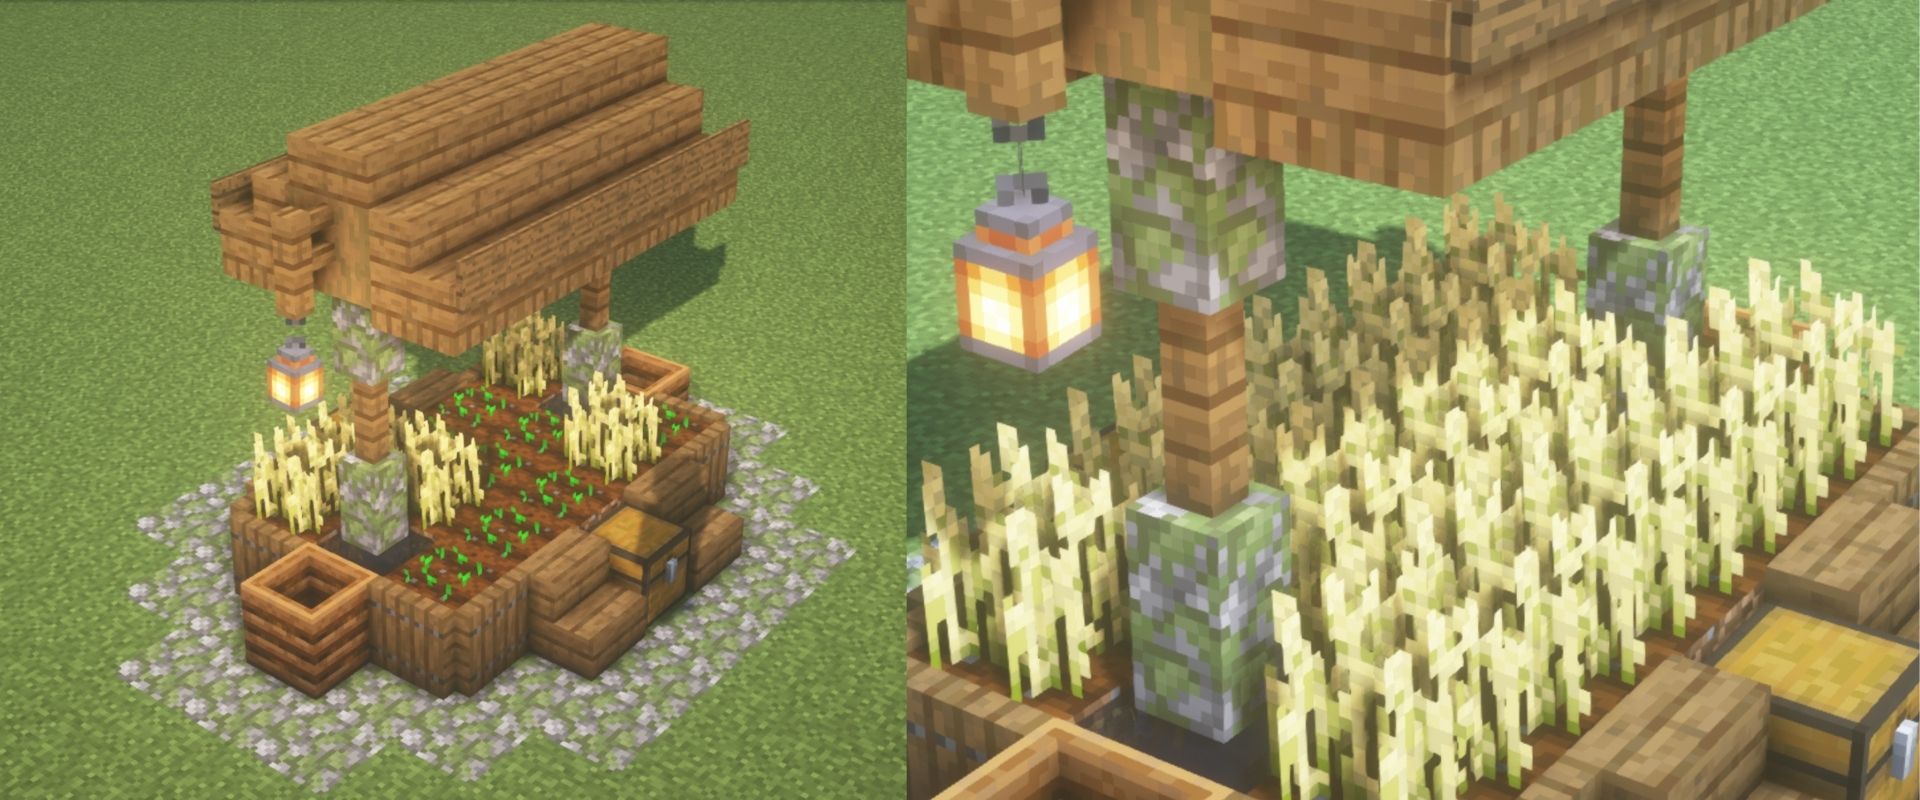 How To Build a Small Roofed Farm in Minecraft